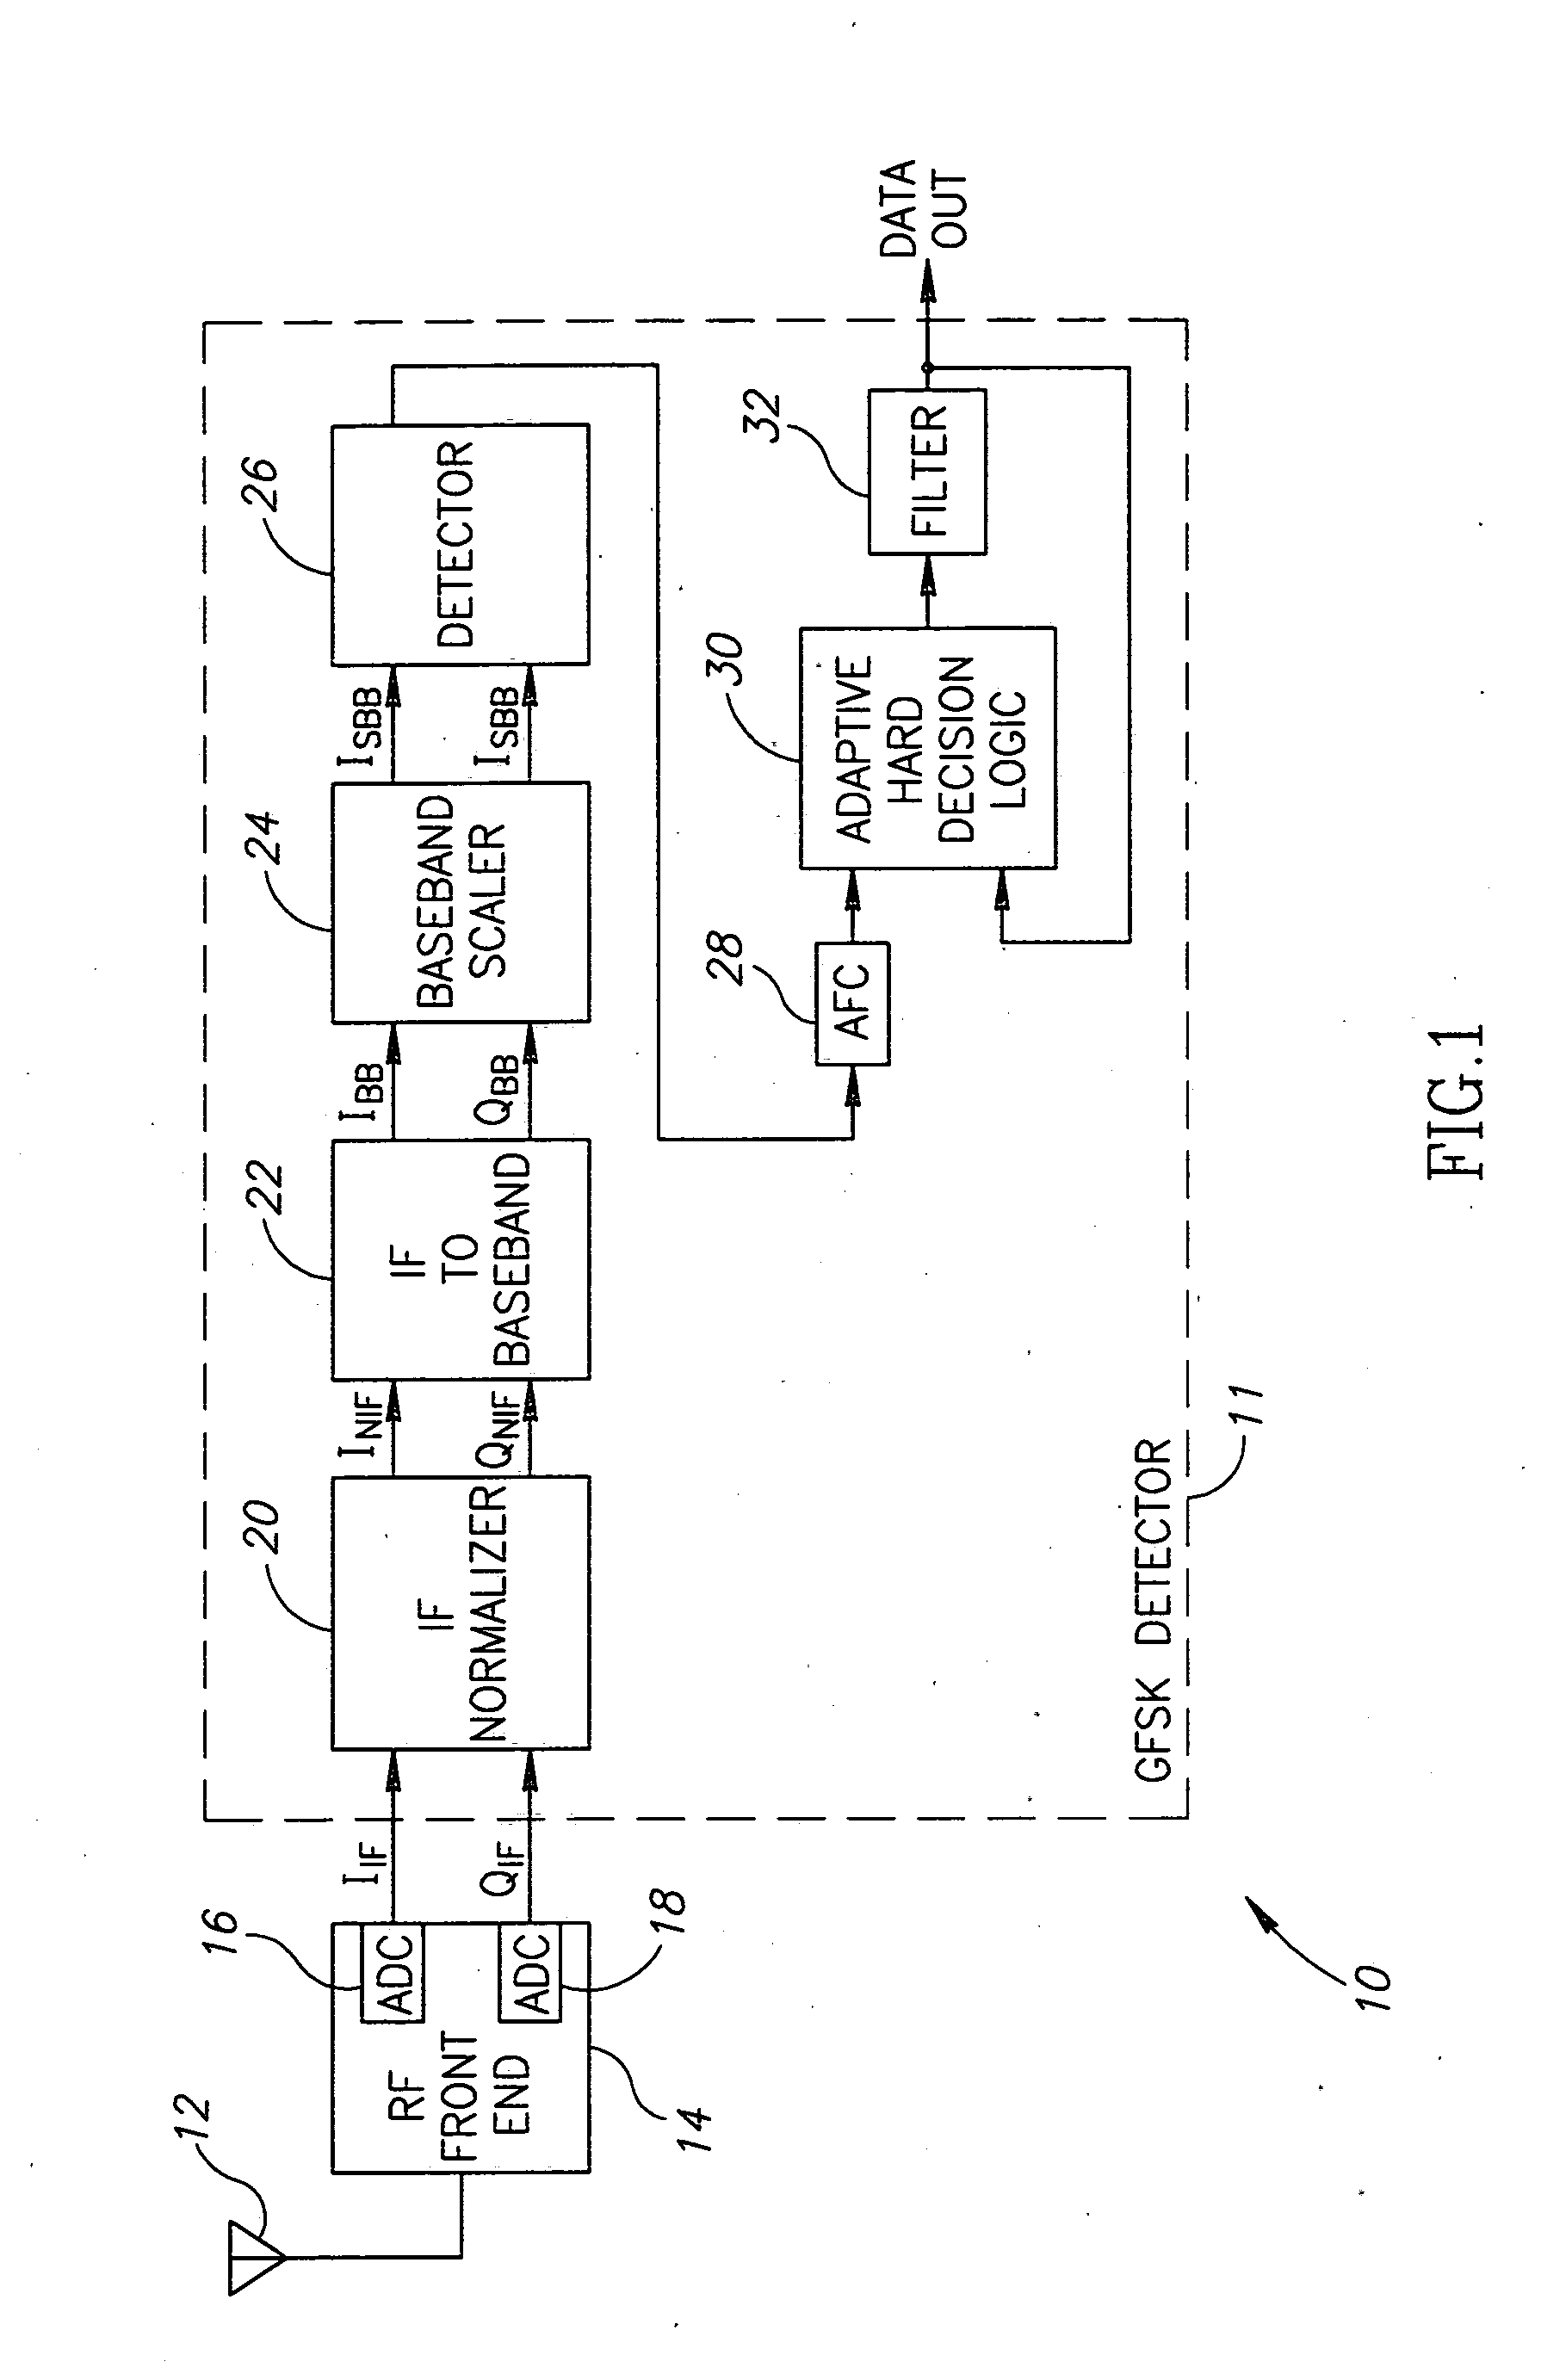 Adjustment of amplitude and DC offsets in a digital receiver